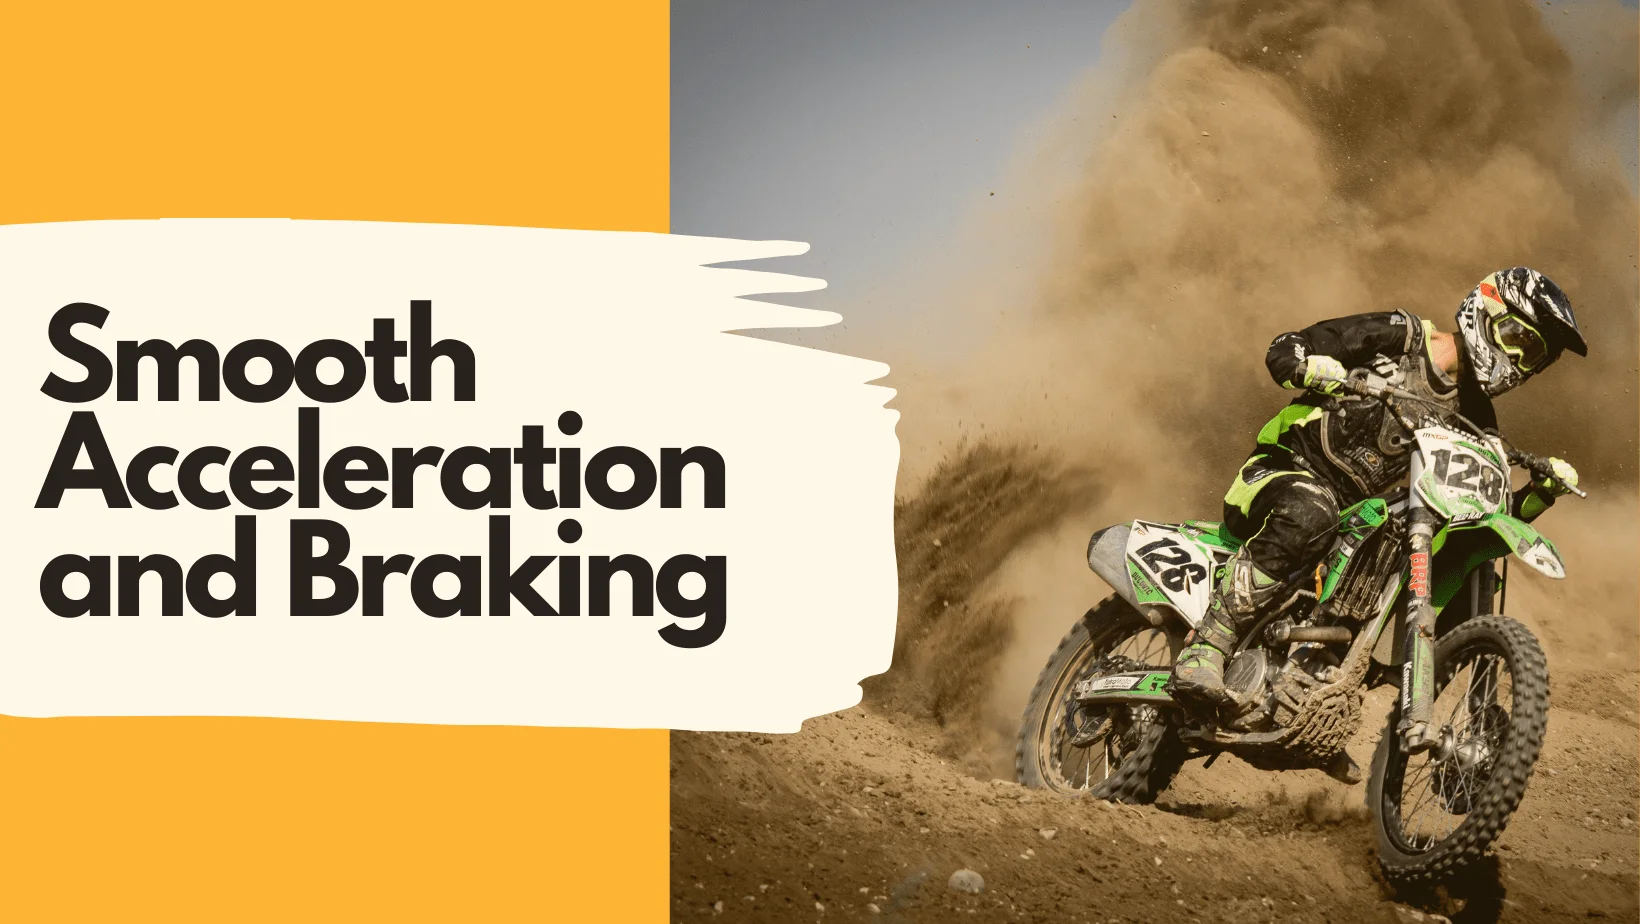 Smooth Dirt Bike Acceleration and Braking for maximum fuel average